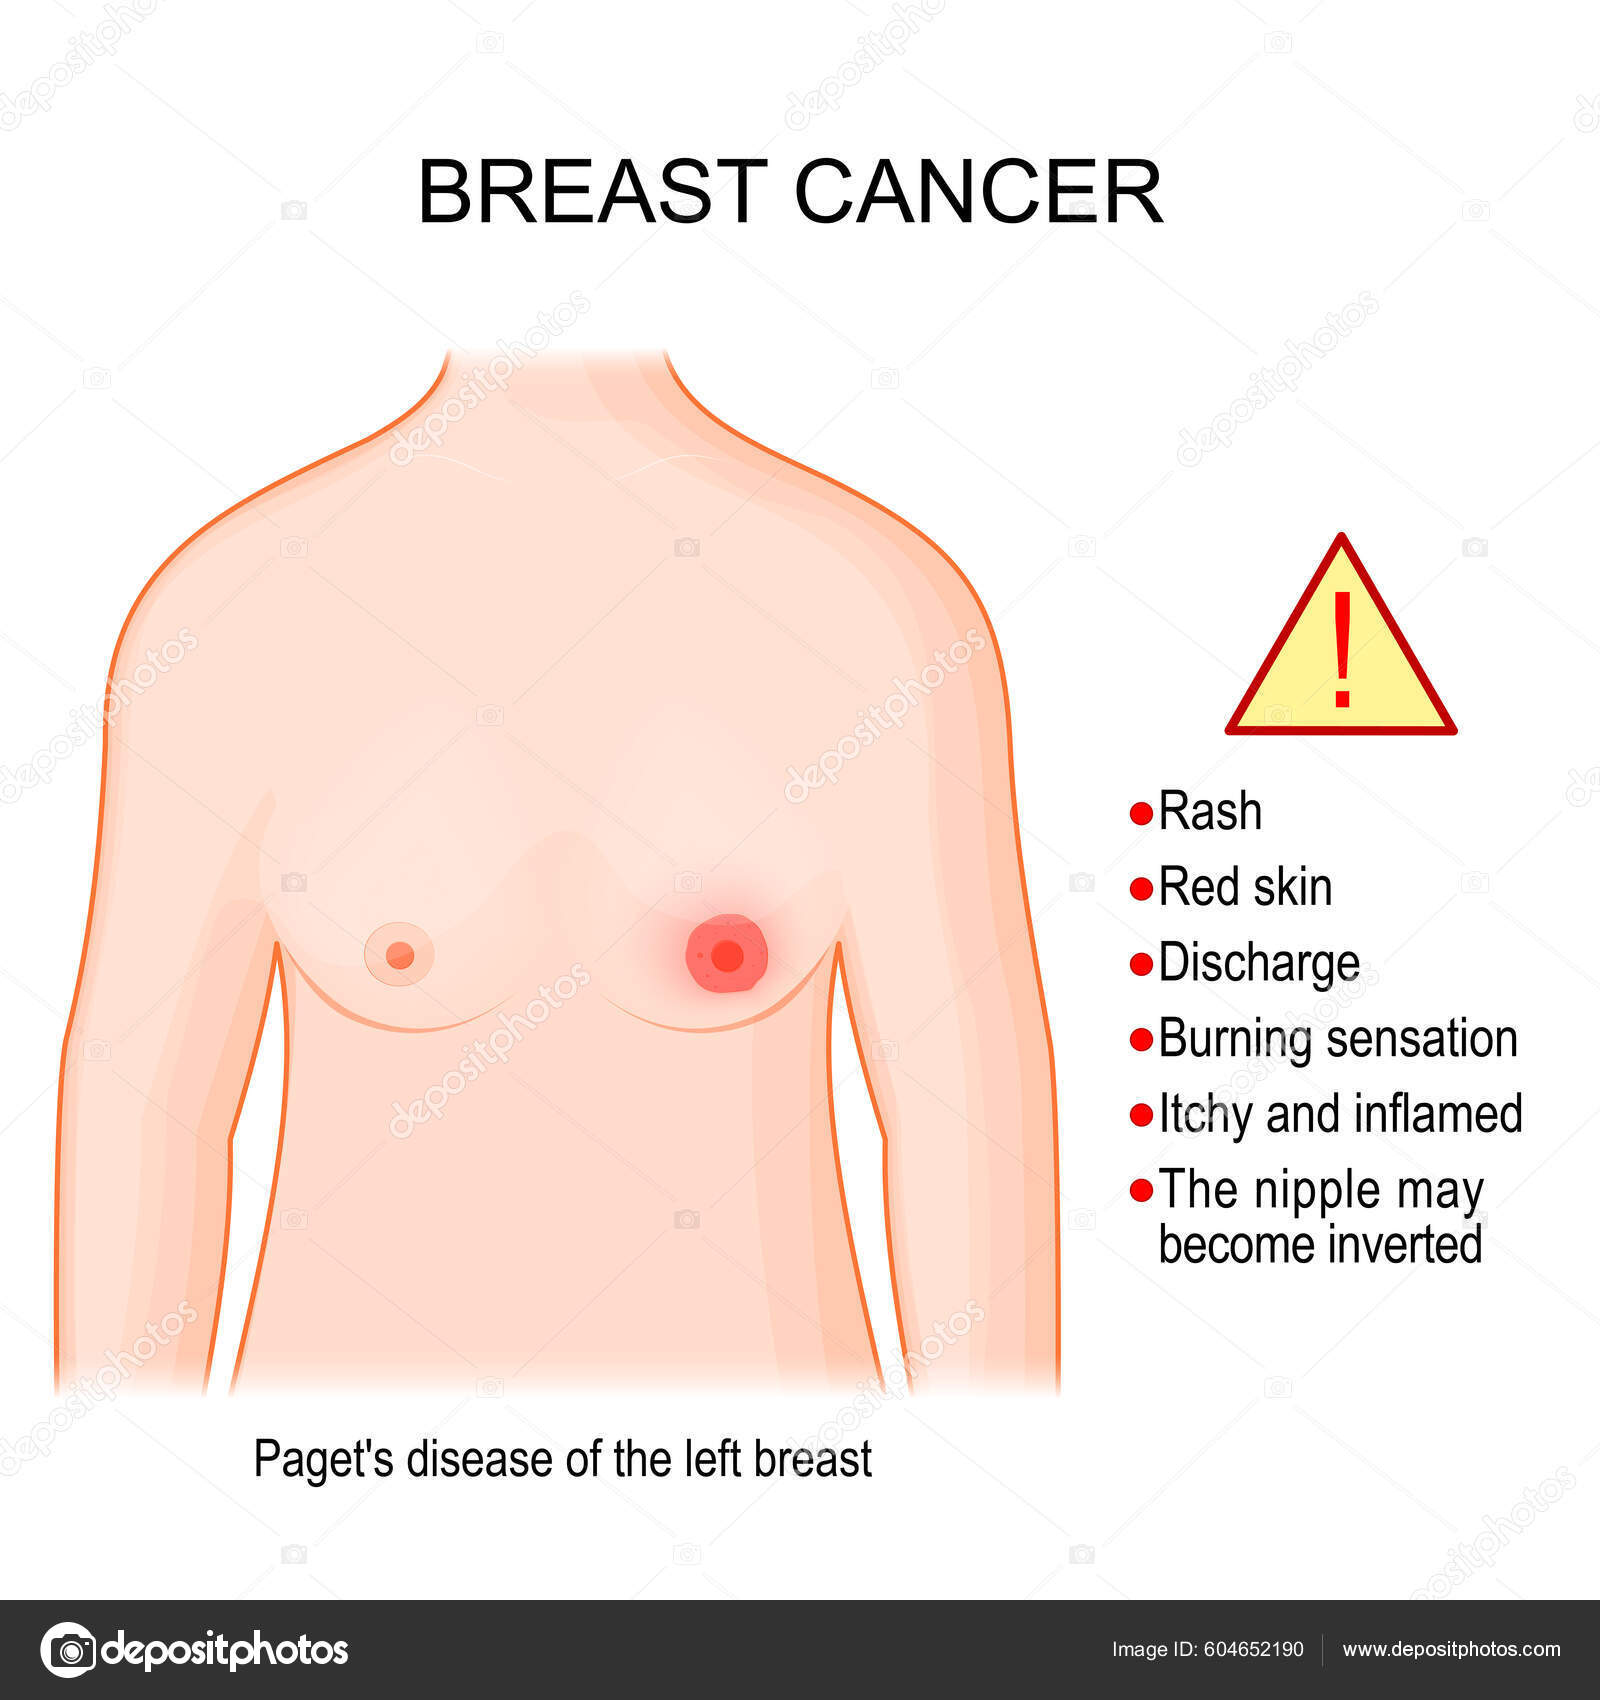 Paget's disease of the breast